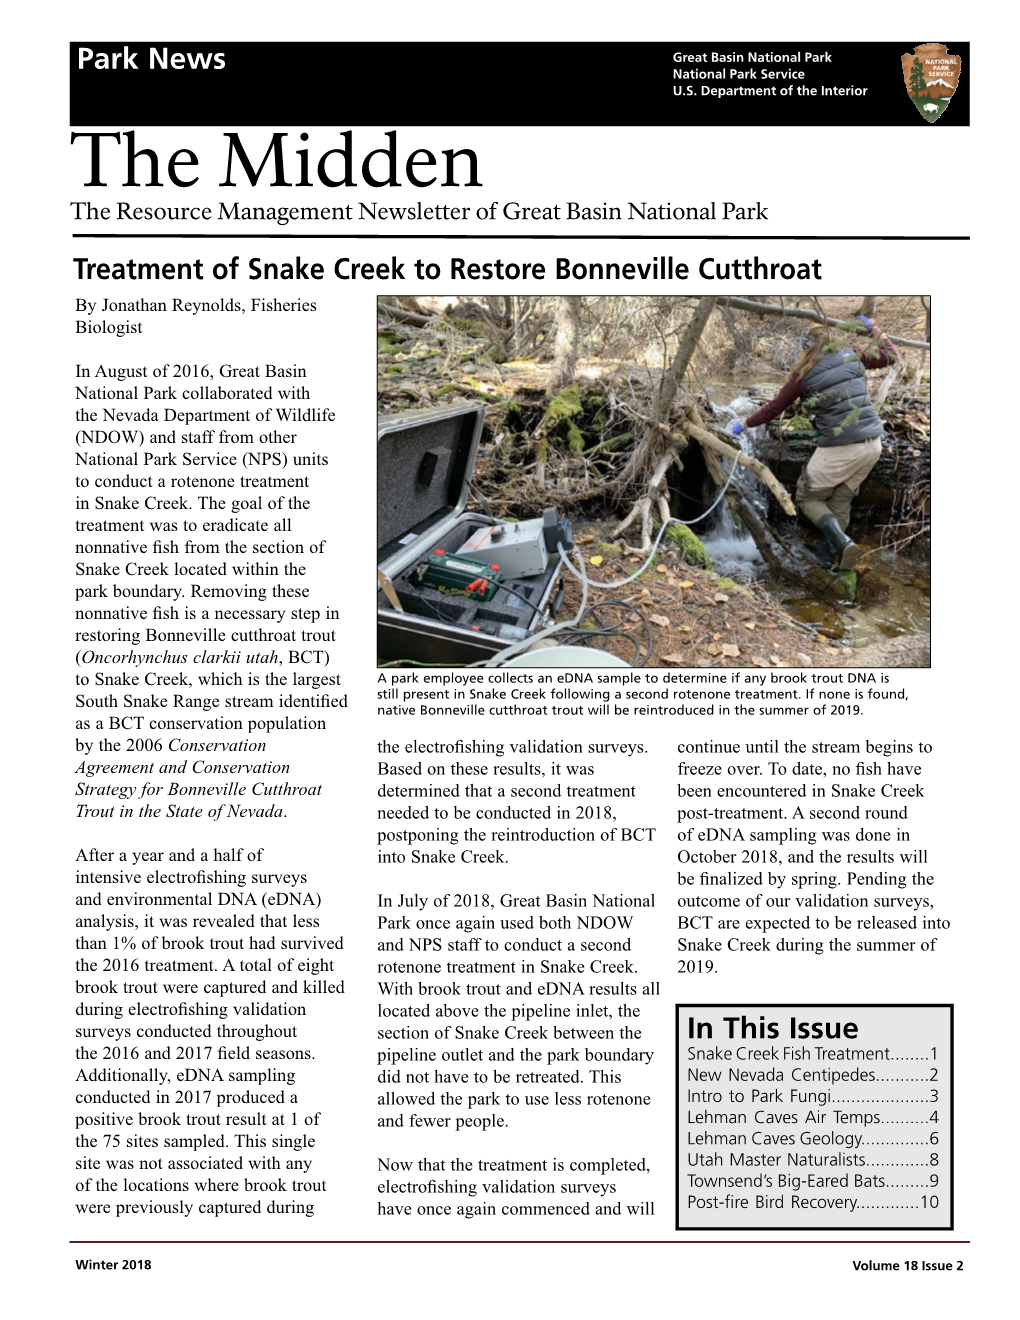 The Midden, the Resource Management Newsletter of Great